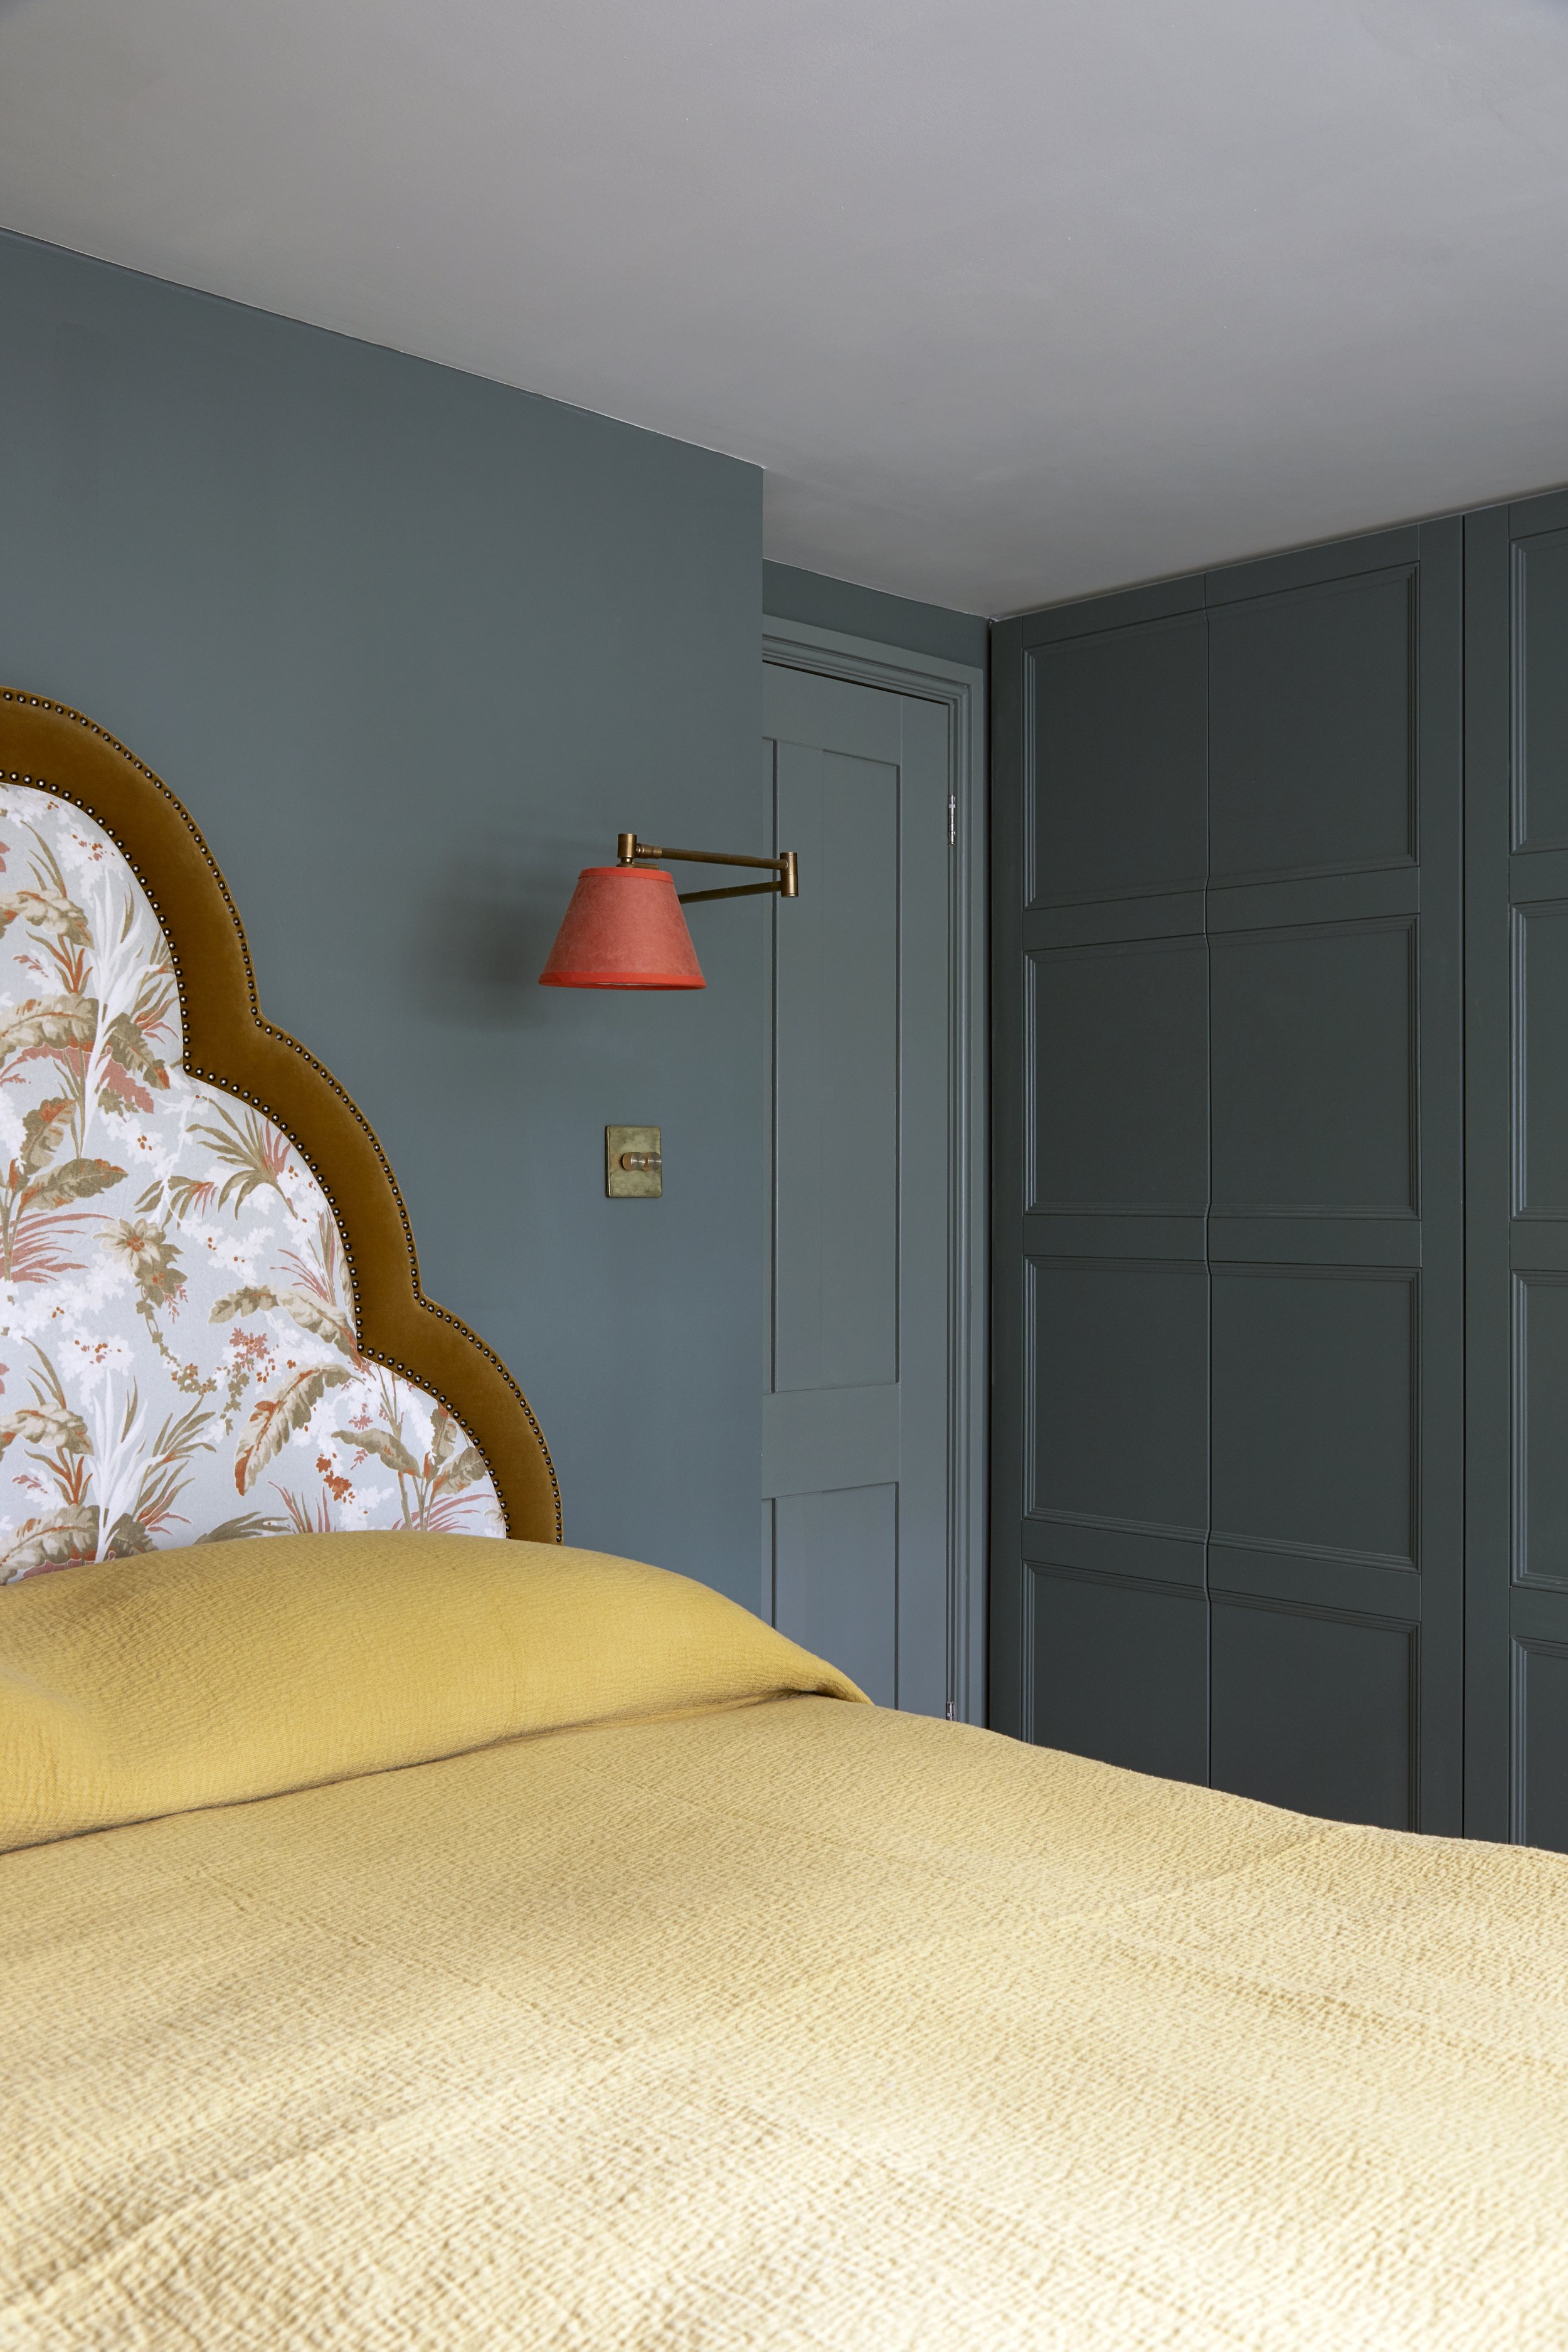 Teal bedroom with orange bedding interior designer Andrew Griffiths of A NEW DAY